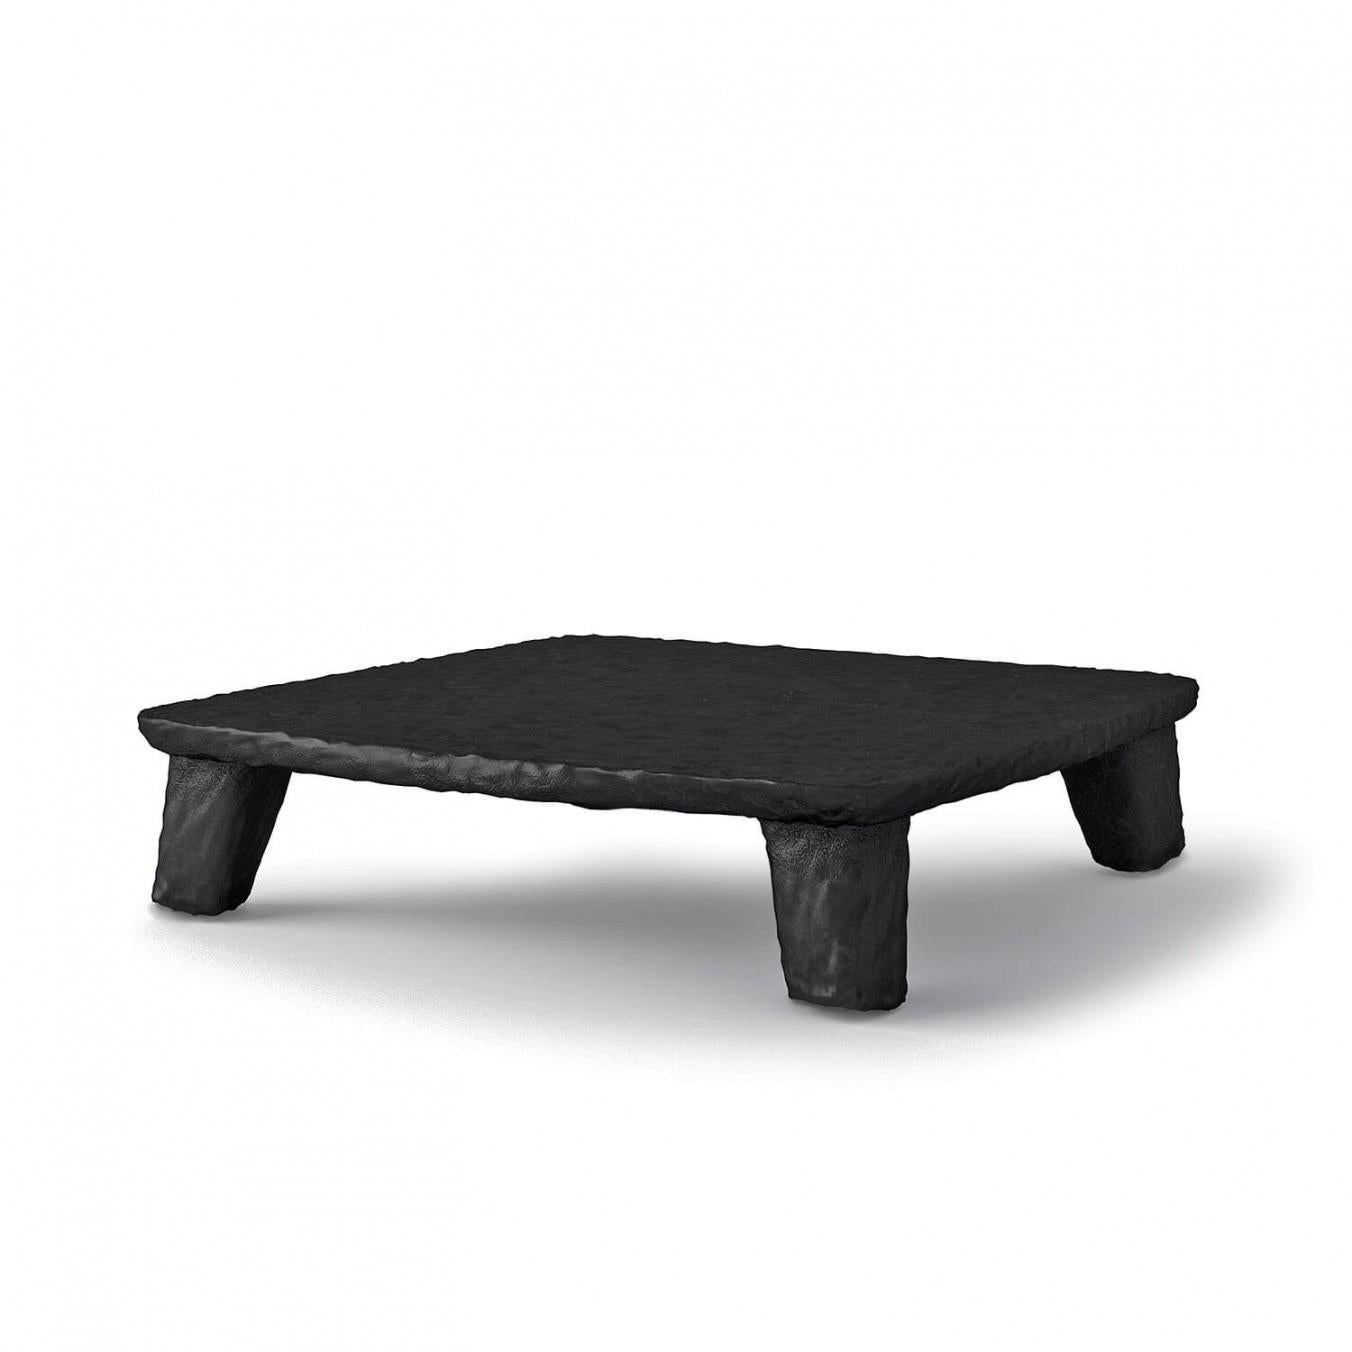 Steel Sculpted Contemporary Long Coffee Table by FAINA